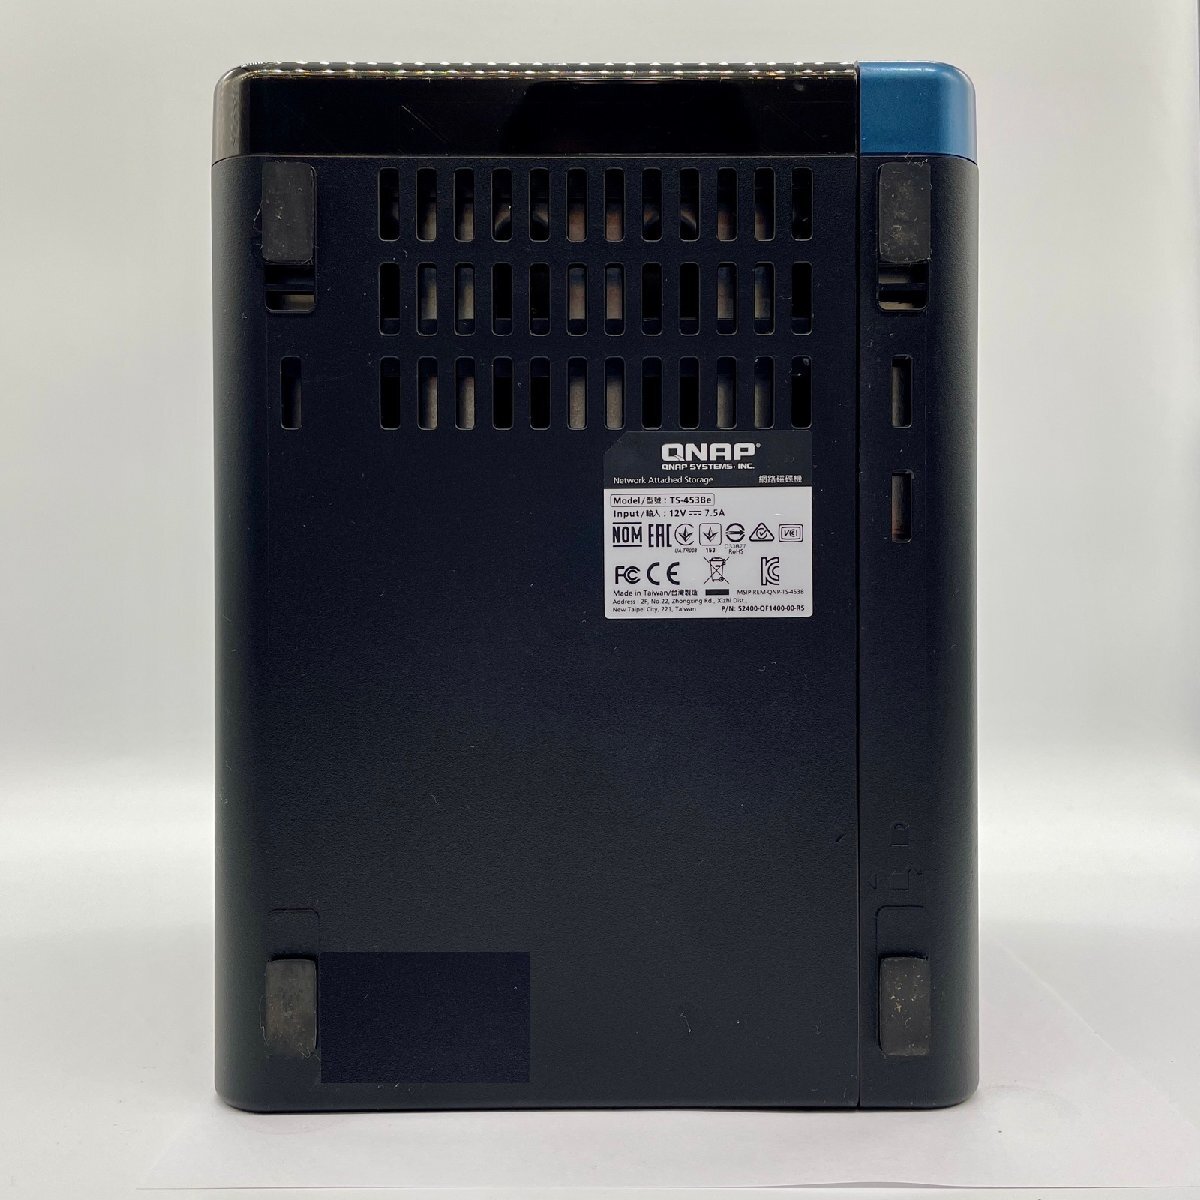 [J806] Junk QNAP TS-453Be 4 Bay HDDNAS - Celeron 1.5GHz / 4GB / HDD less operation verification ending disassembly have been cleaned 